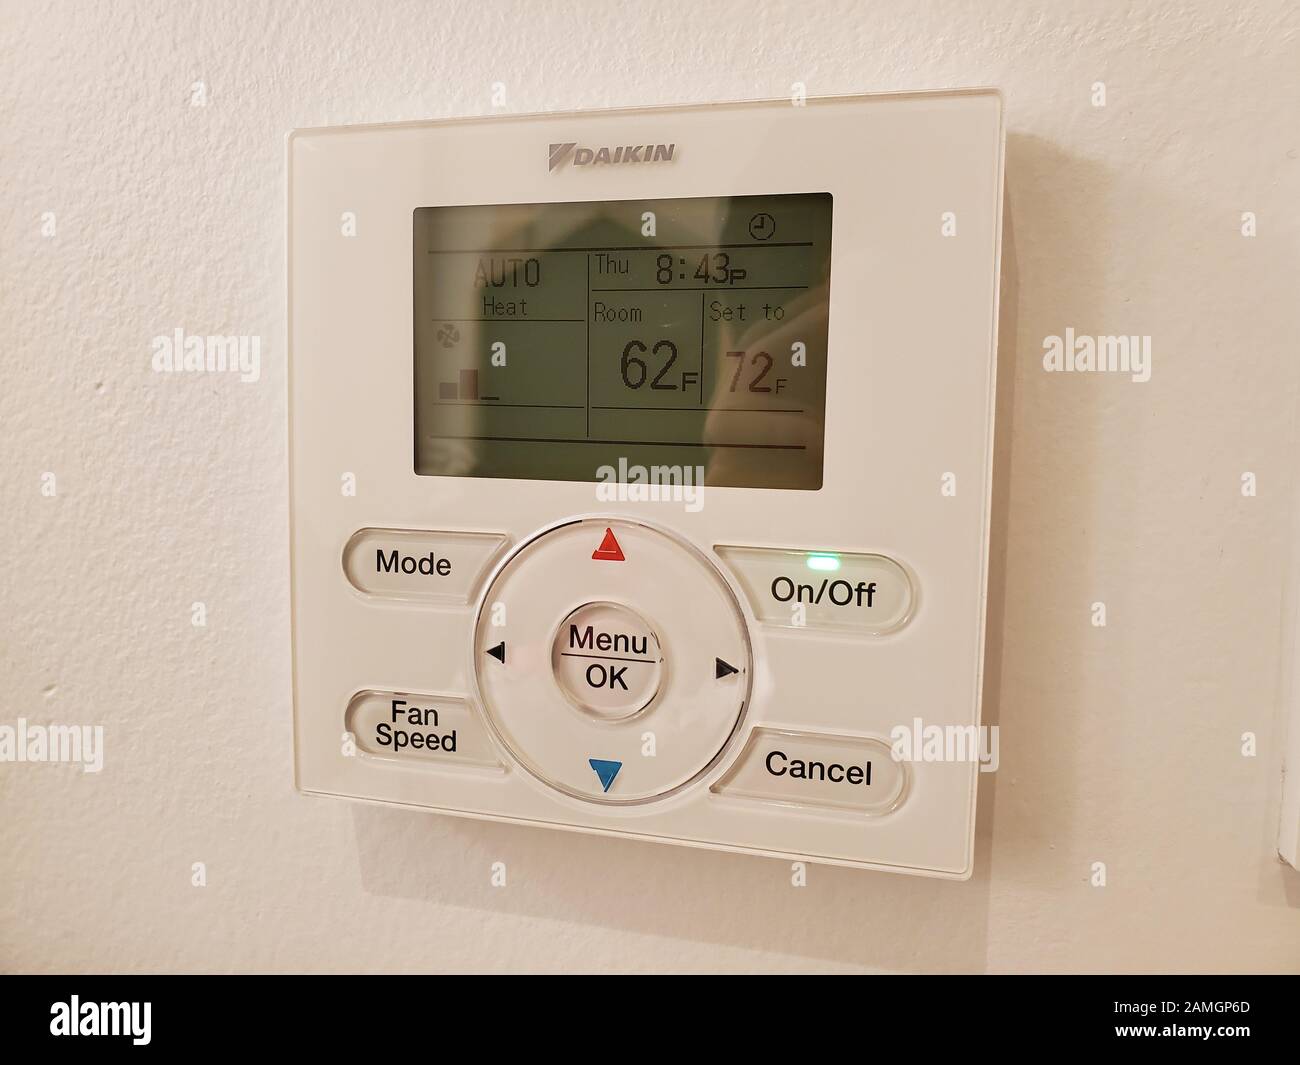 Close-up of Daiken HVAC control panel and thermostat on the wall of a commercial facility, San Ramon, California, December 30, 2019. () Stock Photo